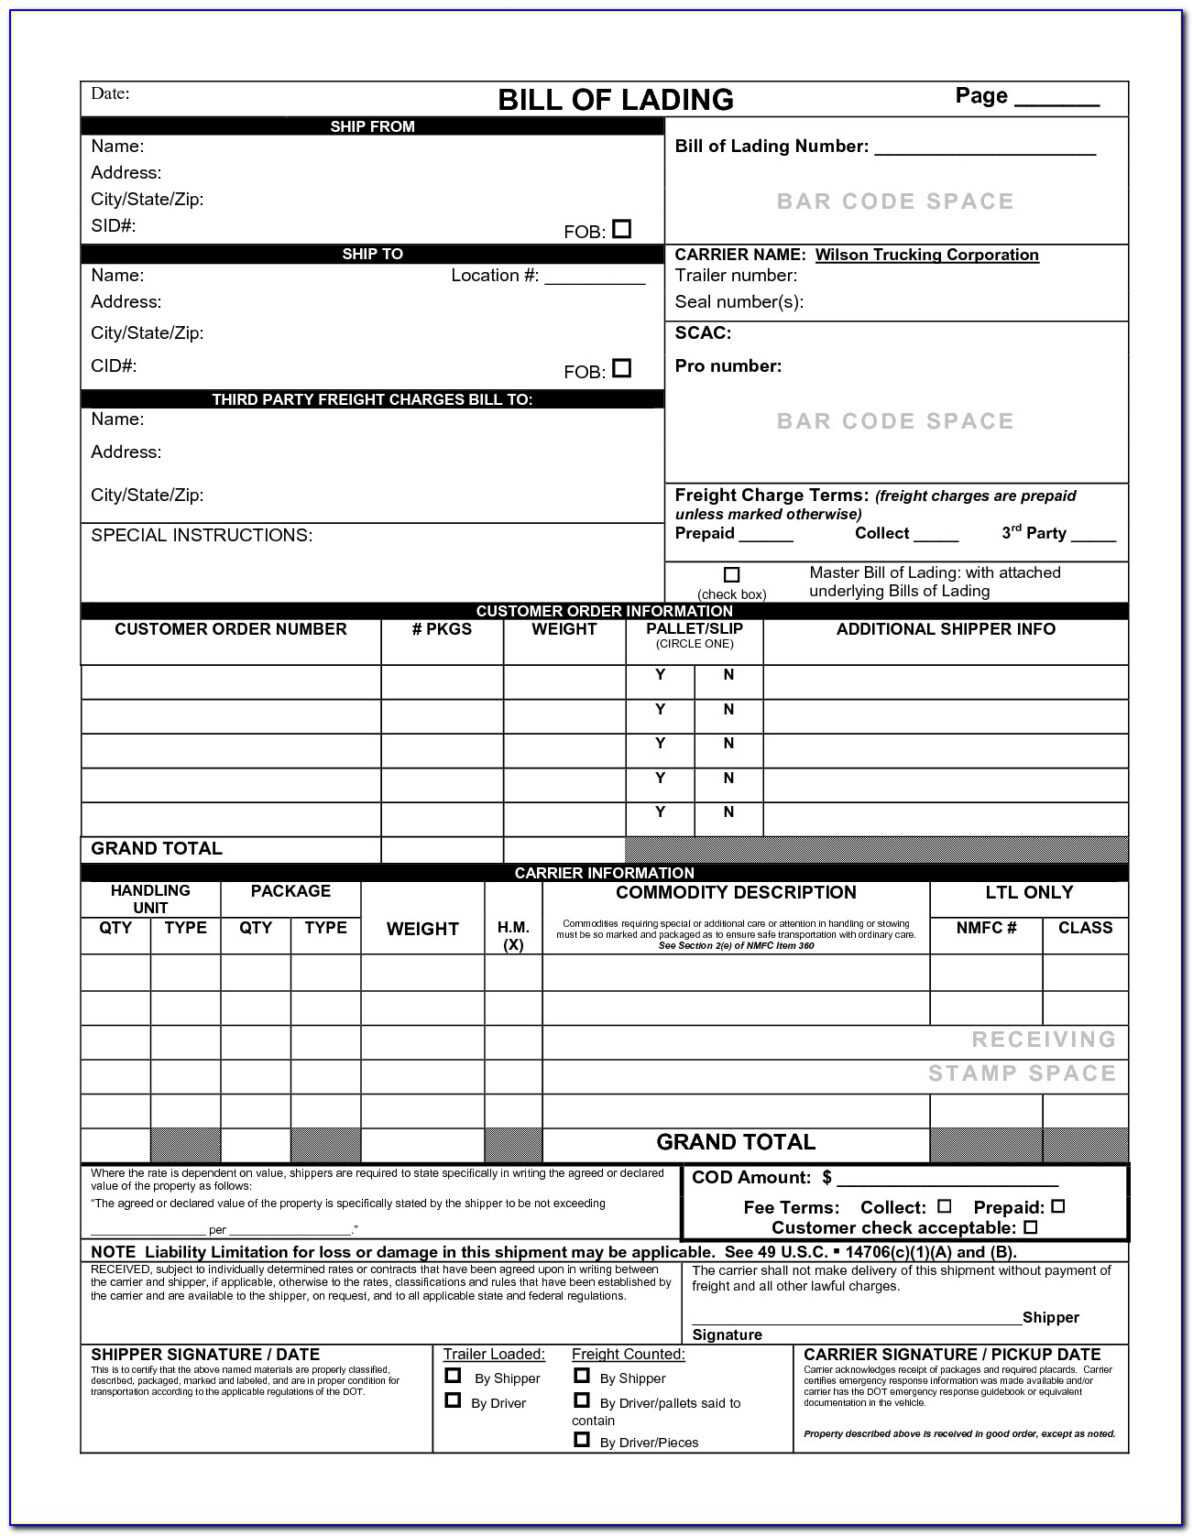 blank-straight-bill-of-lading-short-form-pdf-form-resume-pertaining-to-blank-bol-template